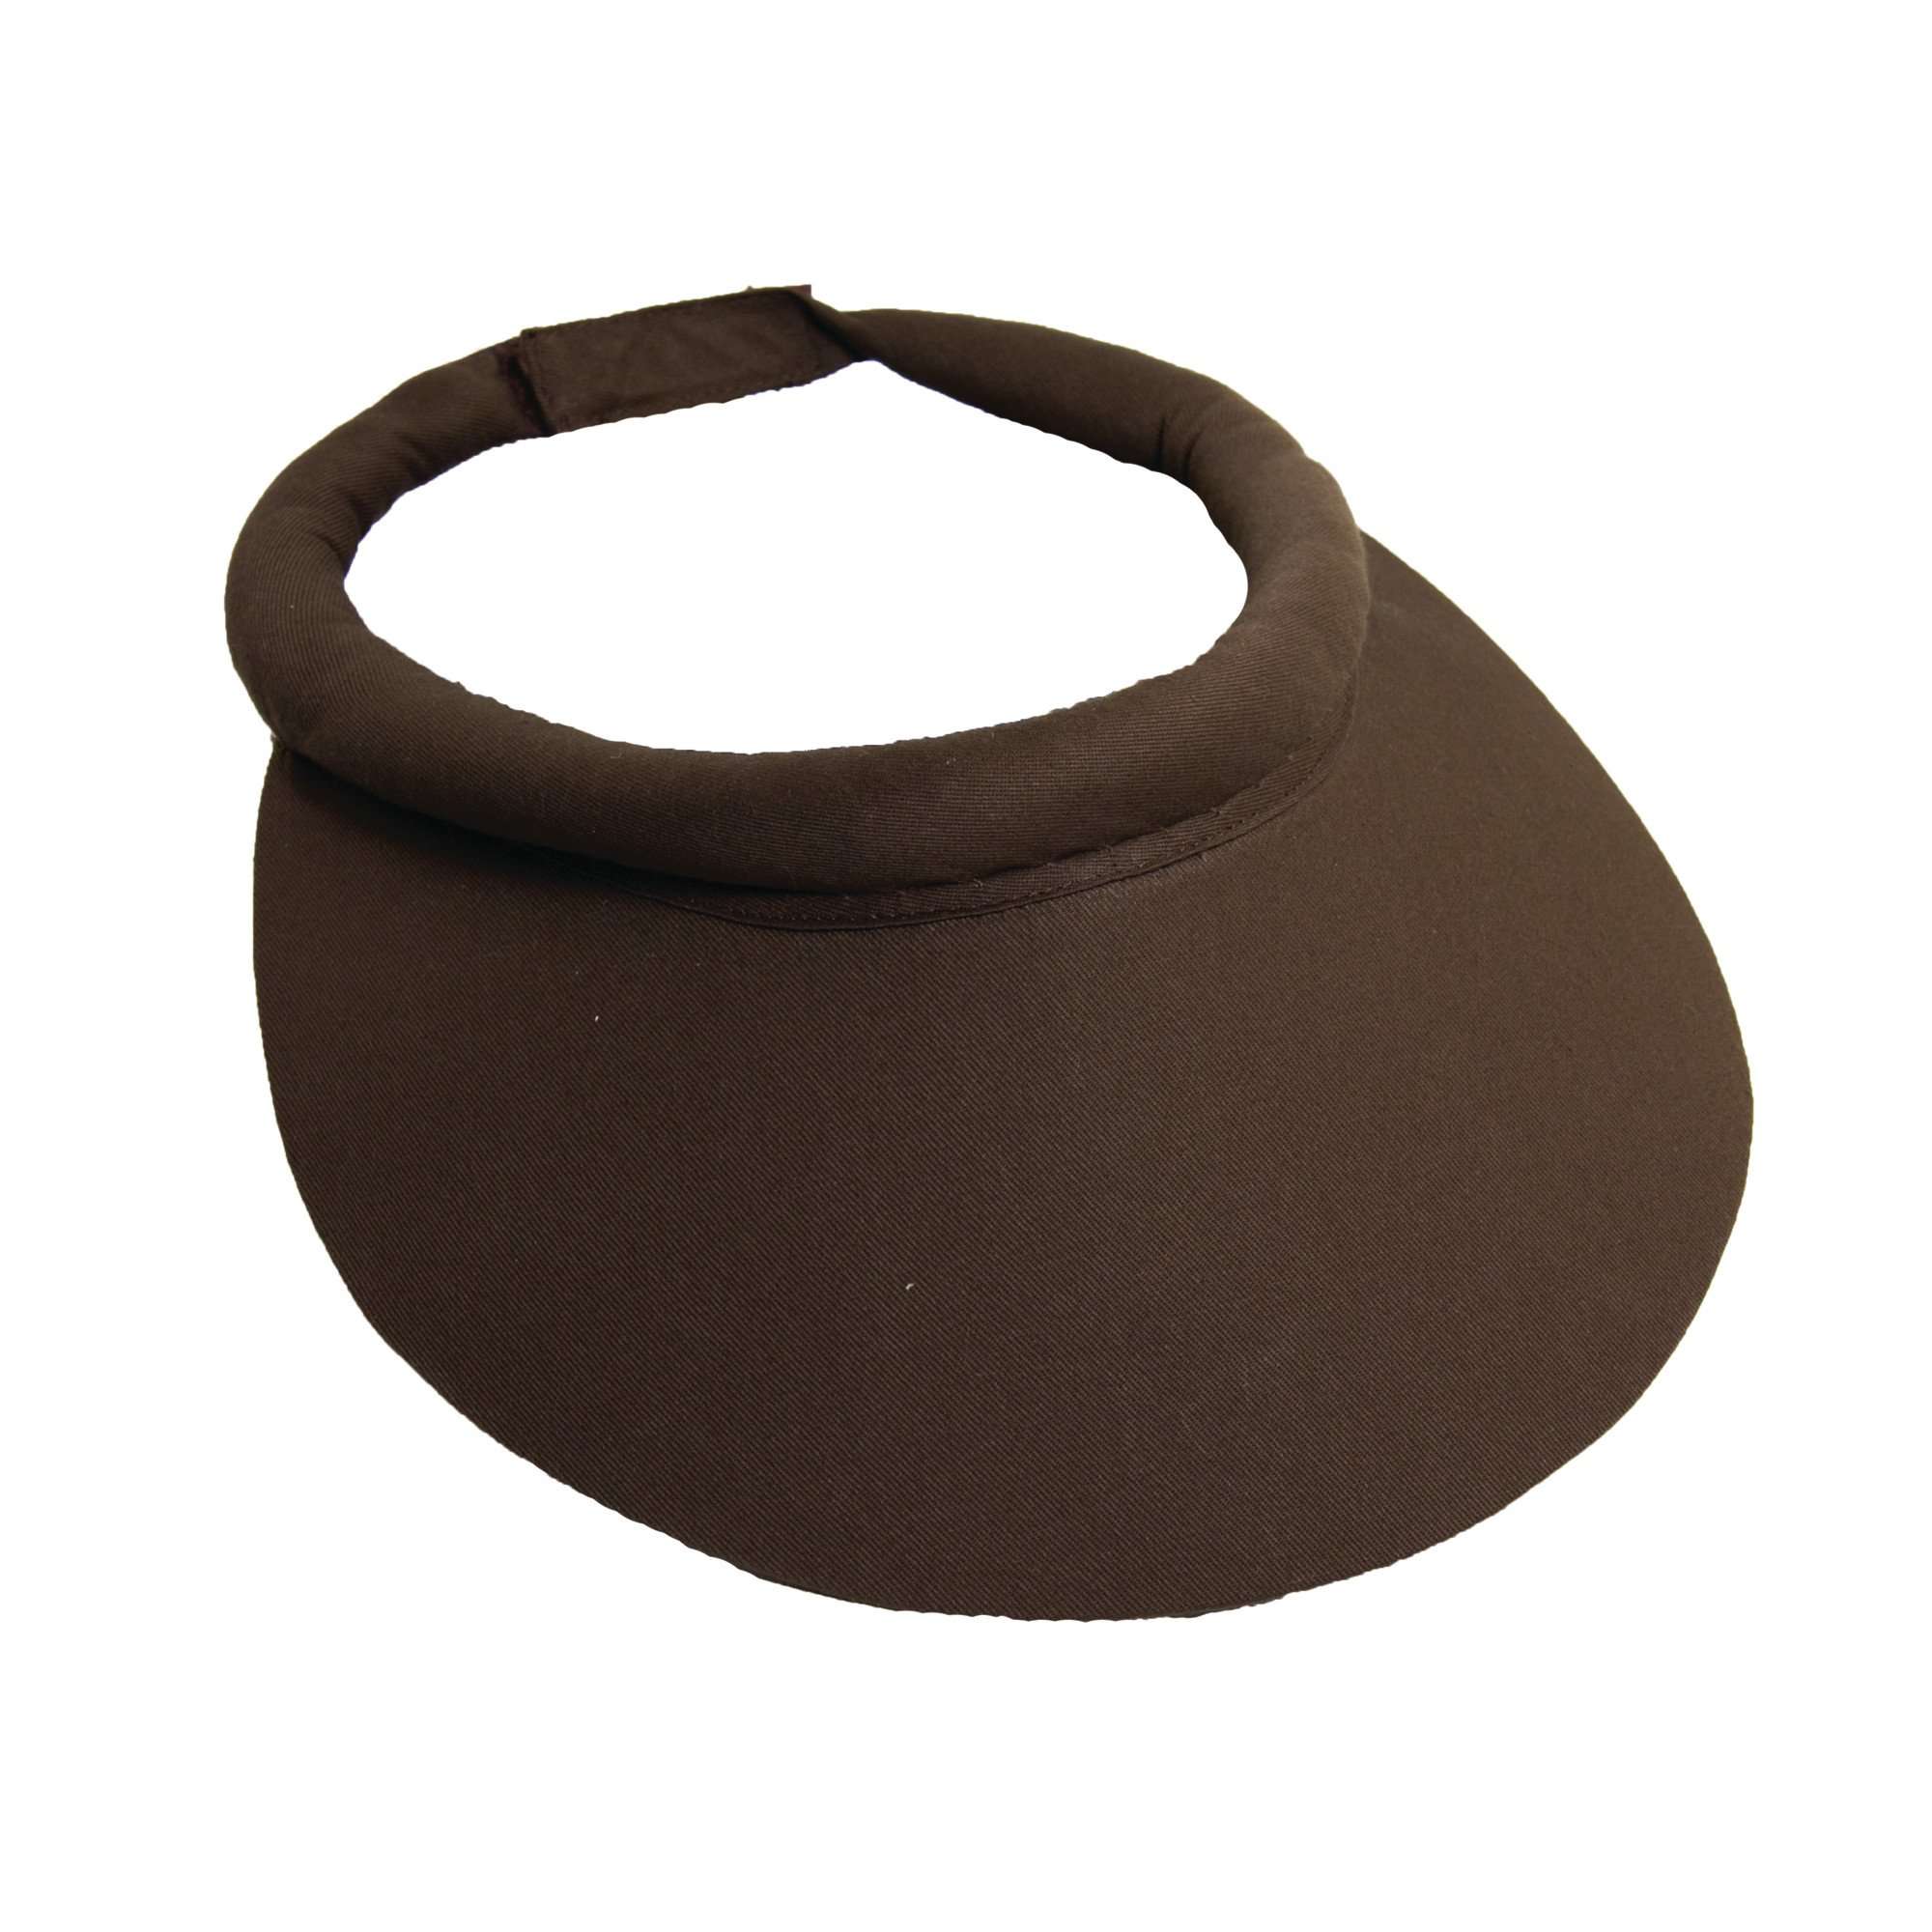 Wide Brim Cotton Sun Visor with Rolled Band by Tropical Trends Visor Cap Dorfman Hat Co. v14BN Chocolate  